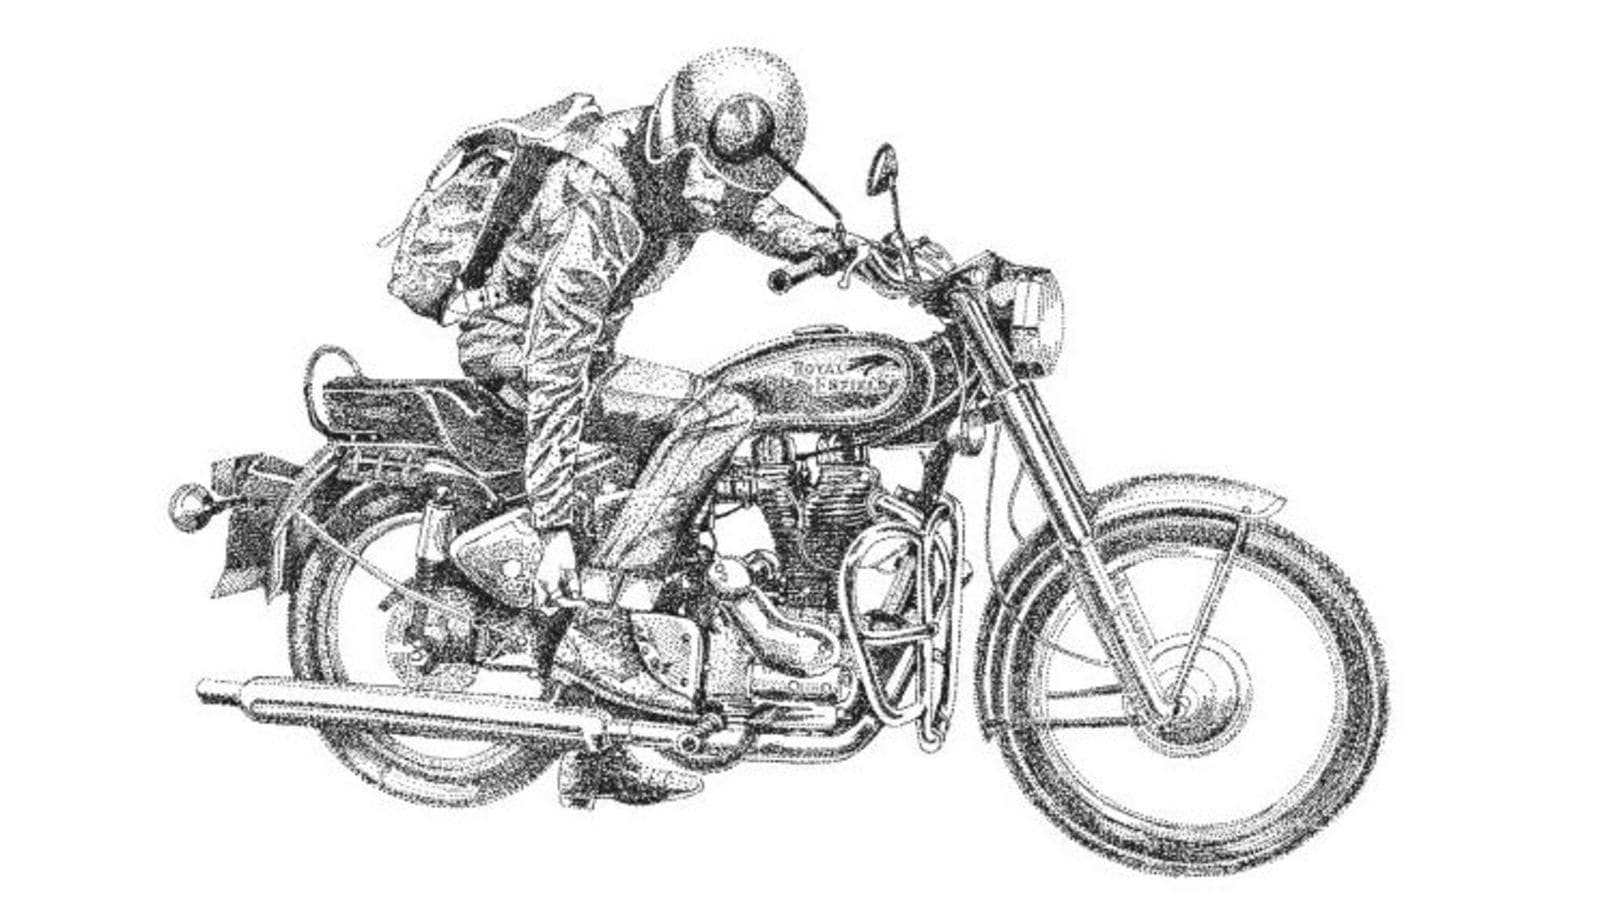 Royal Enfield Announces Second Season Of Art Of Motorcycling